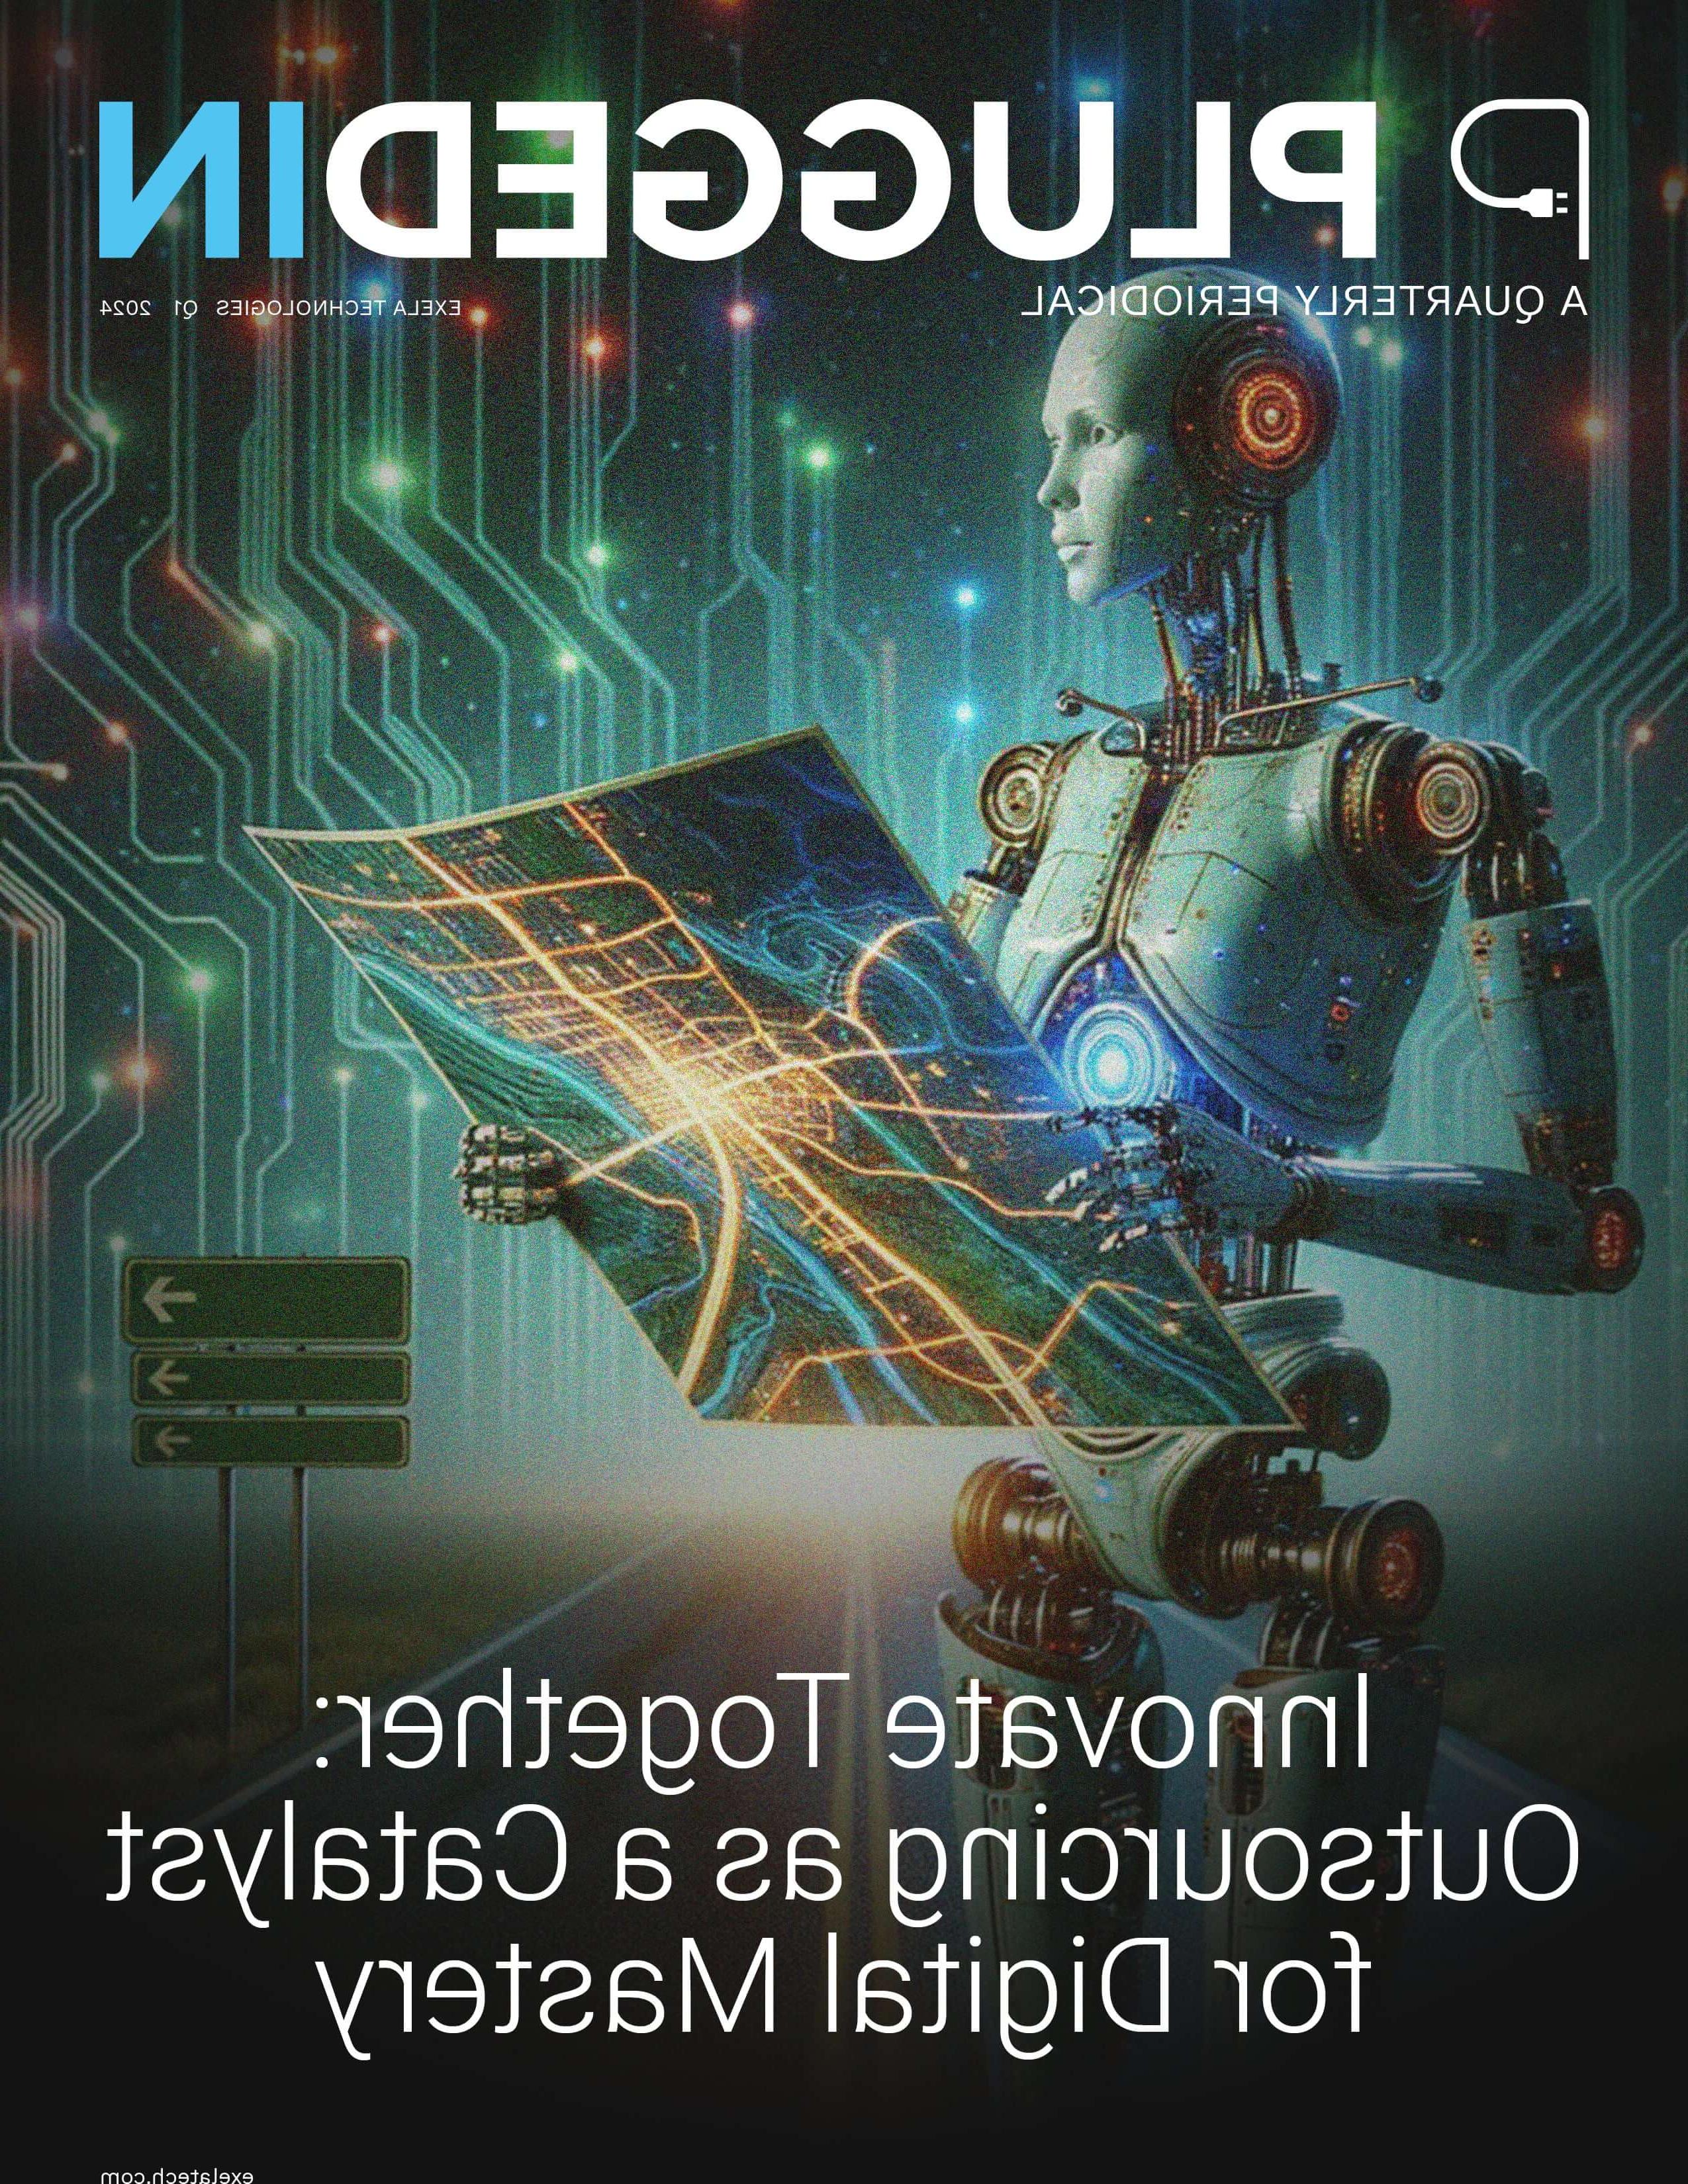 The image displays the cover of "PLUGGED IN," a 2024 quarterly periodical by Exela Technologies. It features a robotic figure holding a glowing digital blueprint, with a circuit board backdrop transitioning into outer space. The cover headline states "Innovate Together: Outsourcing as a Catalyst for Digital Mastery," and the website "semadanisik.com" is listed at the bottom.